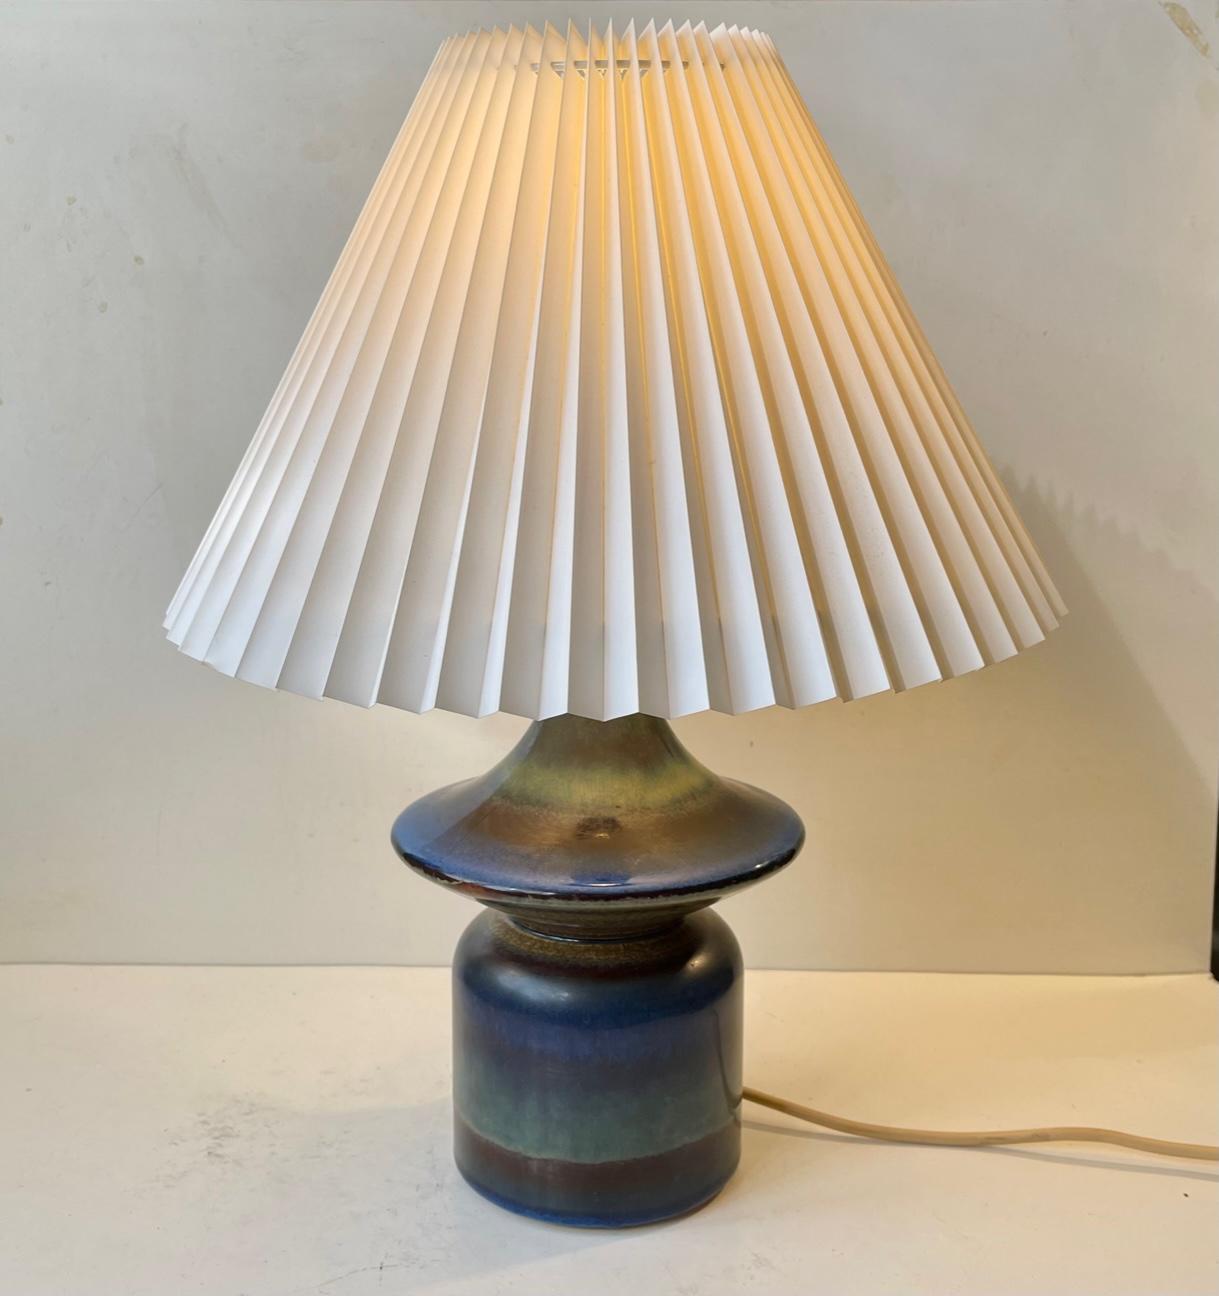 Danish diablo shaped ceramic table lamp with a 'rainbow' of multiple glazes skillfully 'fussioned' together. Much similar to the techniques popularized by Gertud Vasegaard and CH Stalhane. This particular one was made at Søholm in Denmark during the